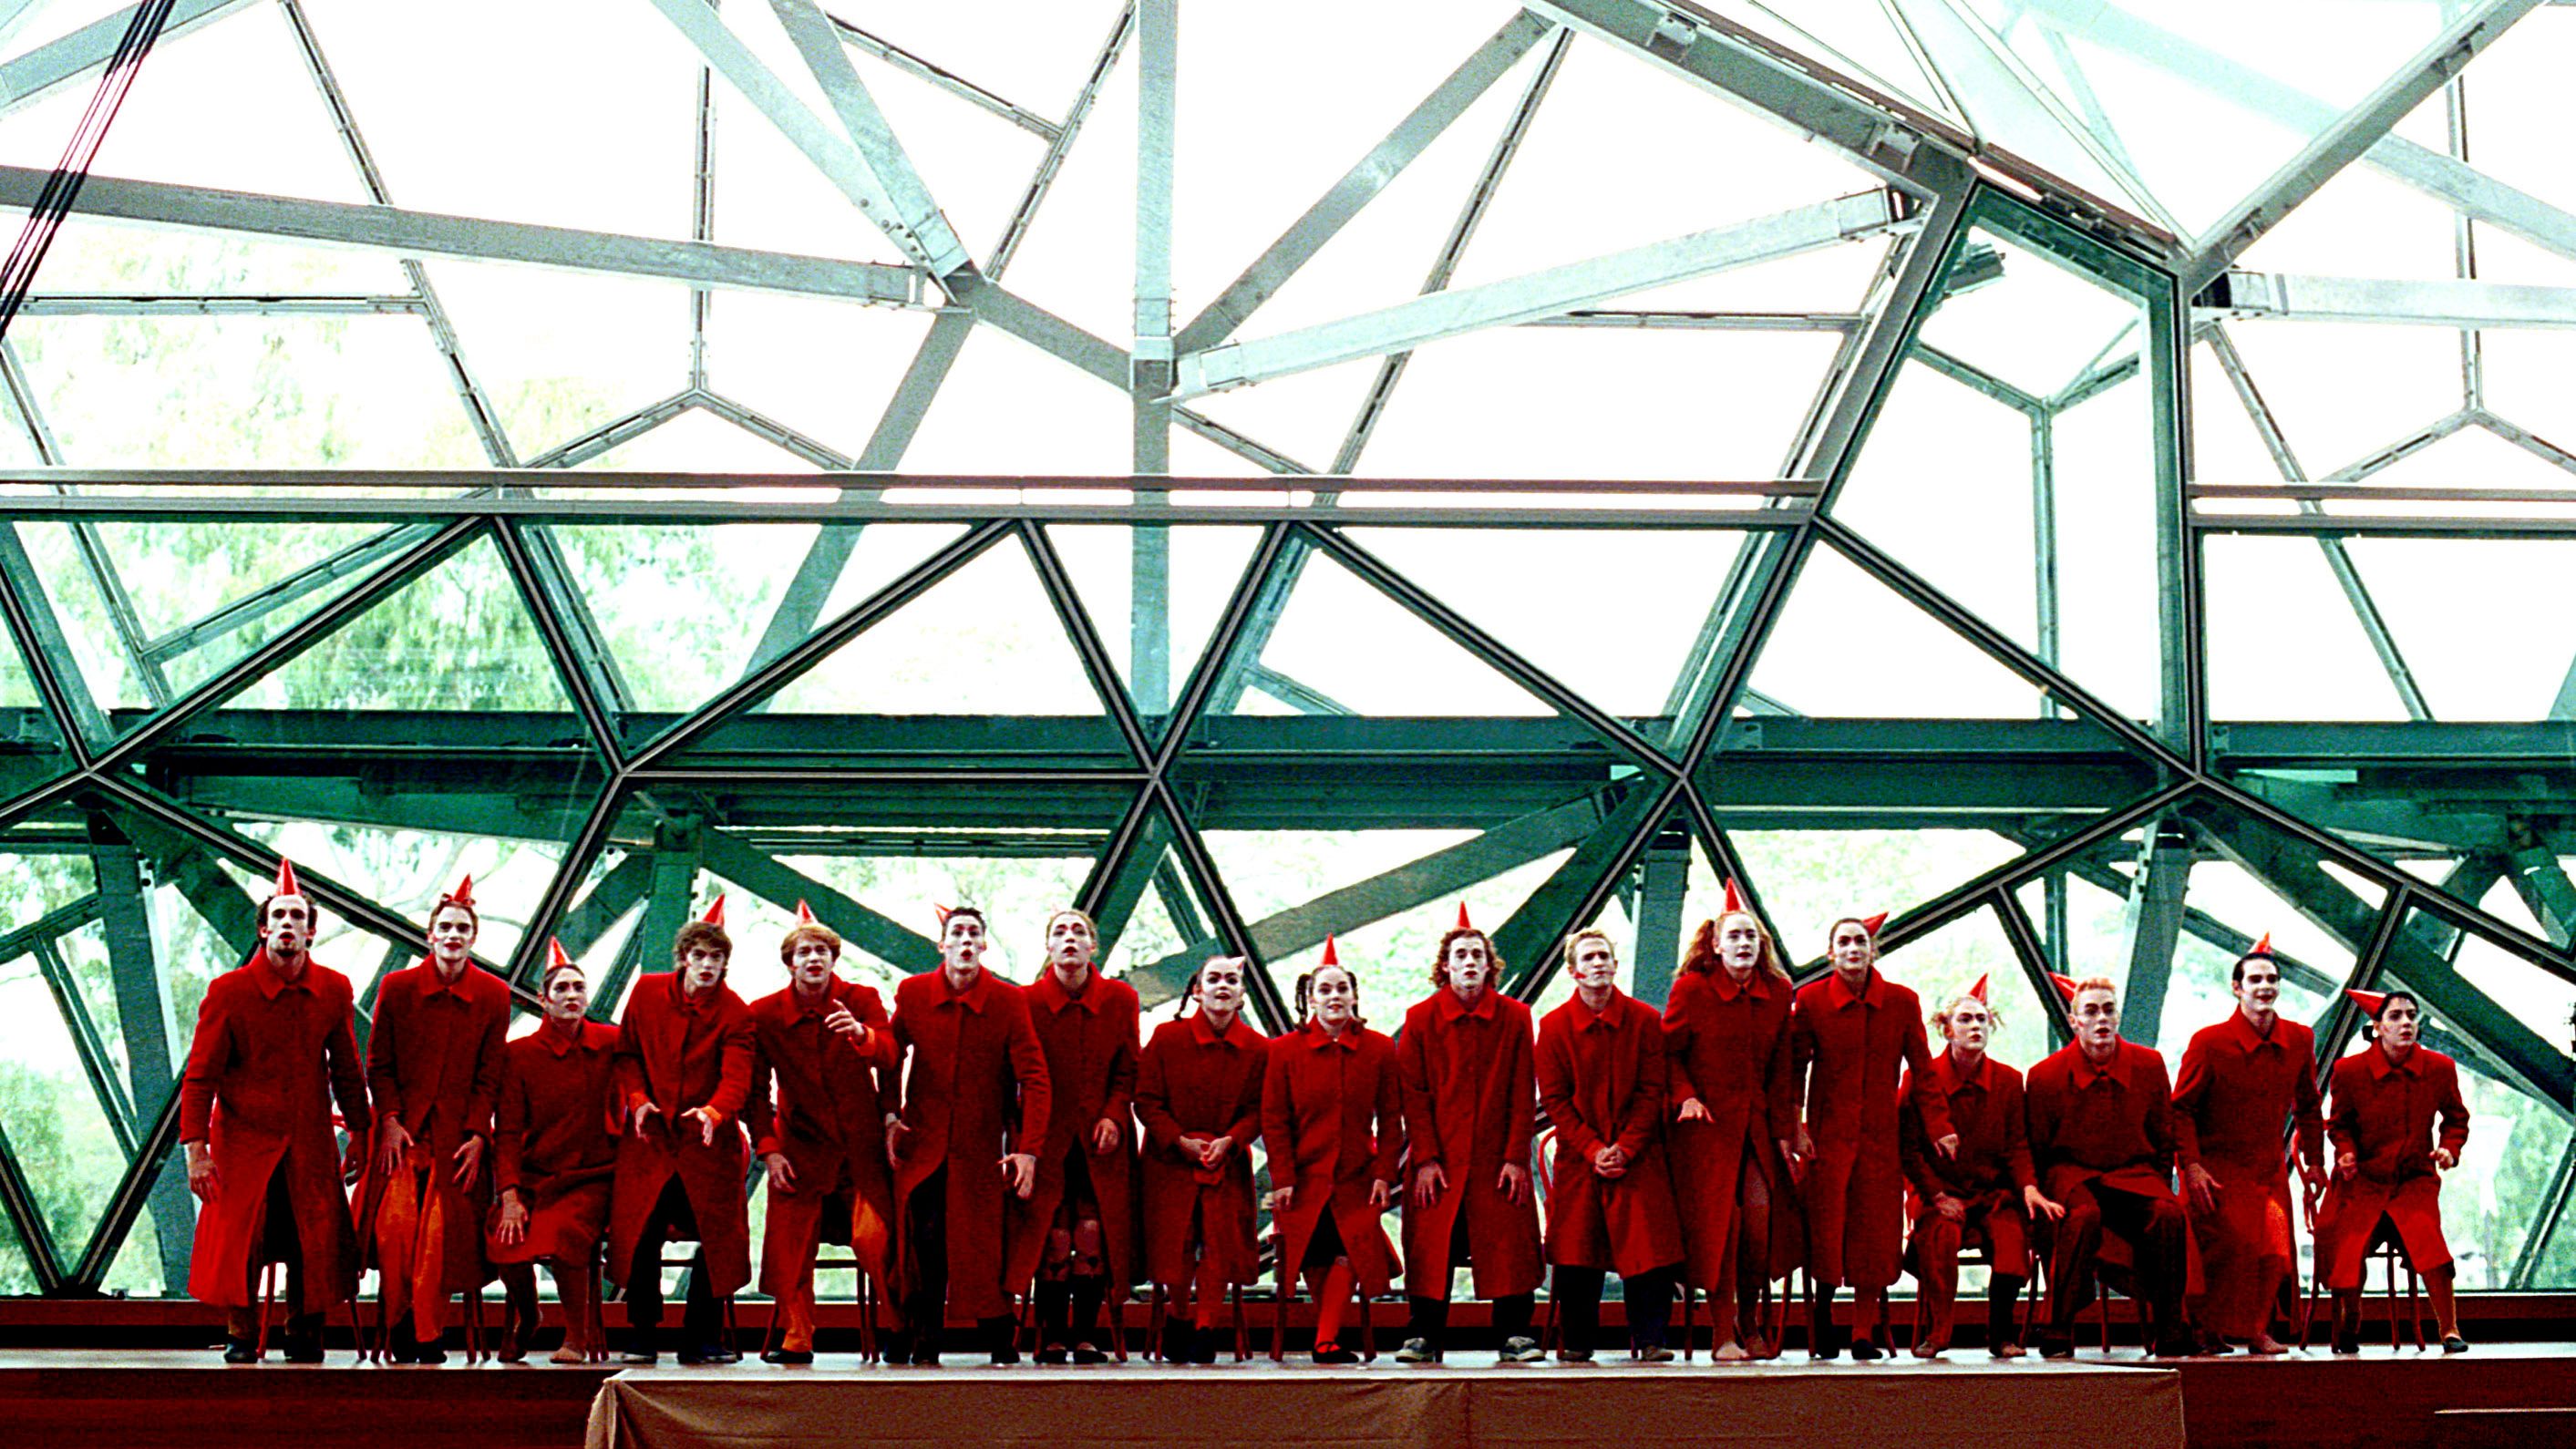 Performers in red costumes pose in front of a large glass window which includes metal rods forming geometric shapes